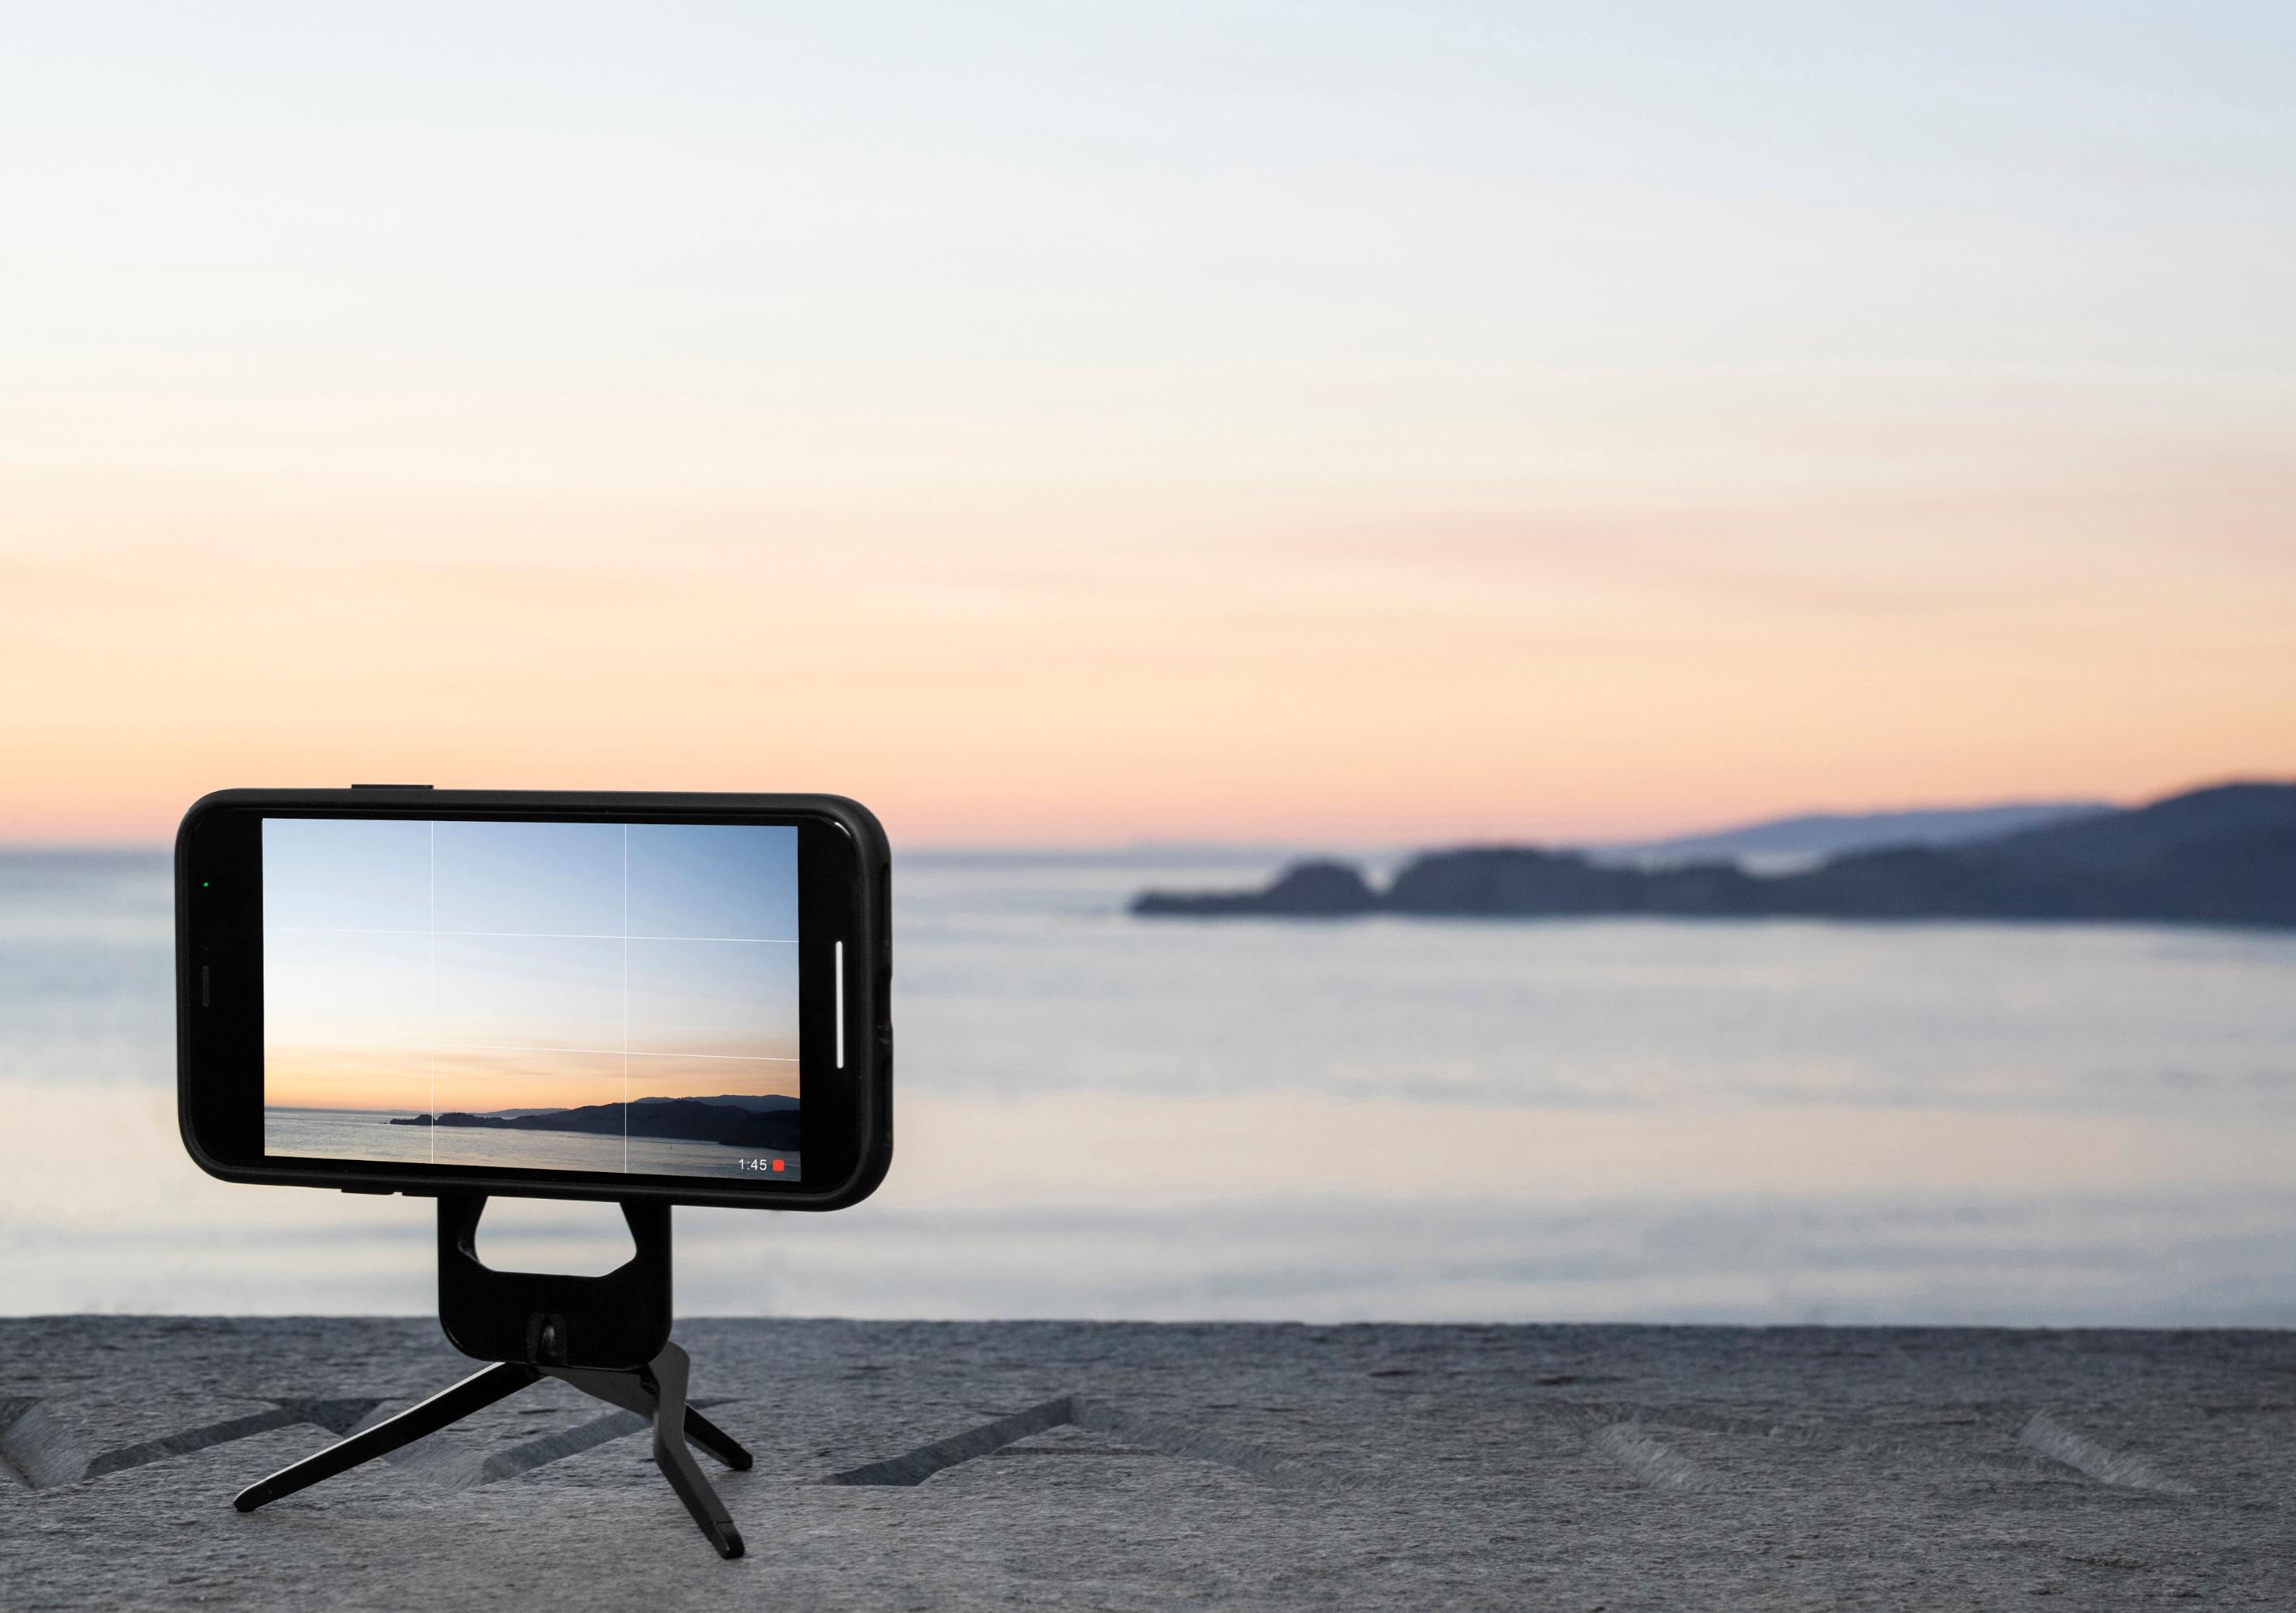 A photo of the phone standing on Peak Design's Mobile Tripod showing the sunset